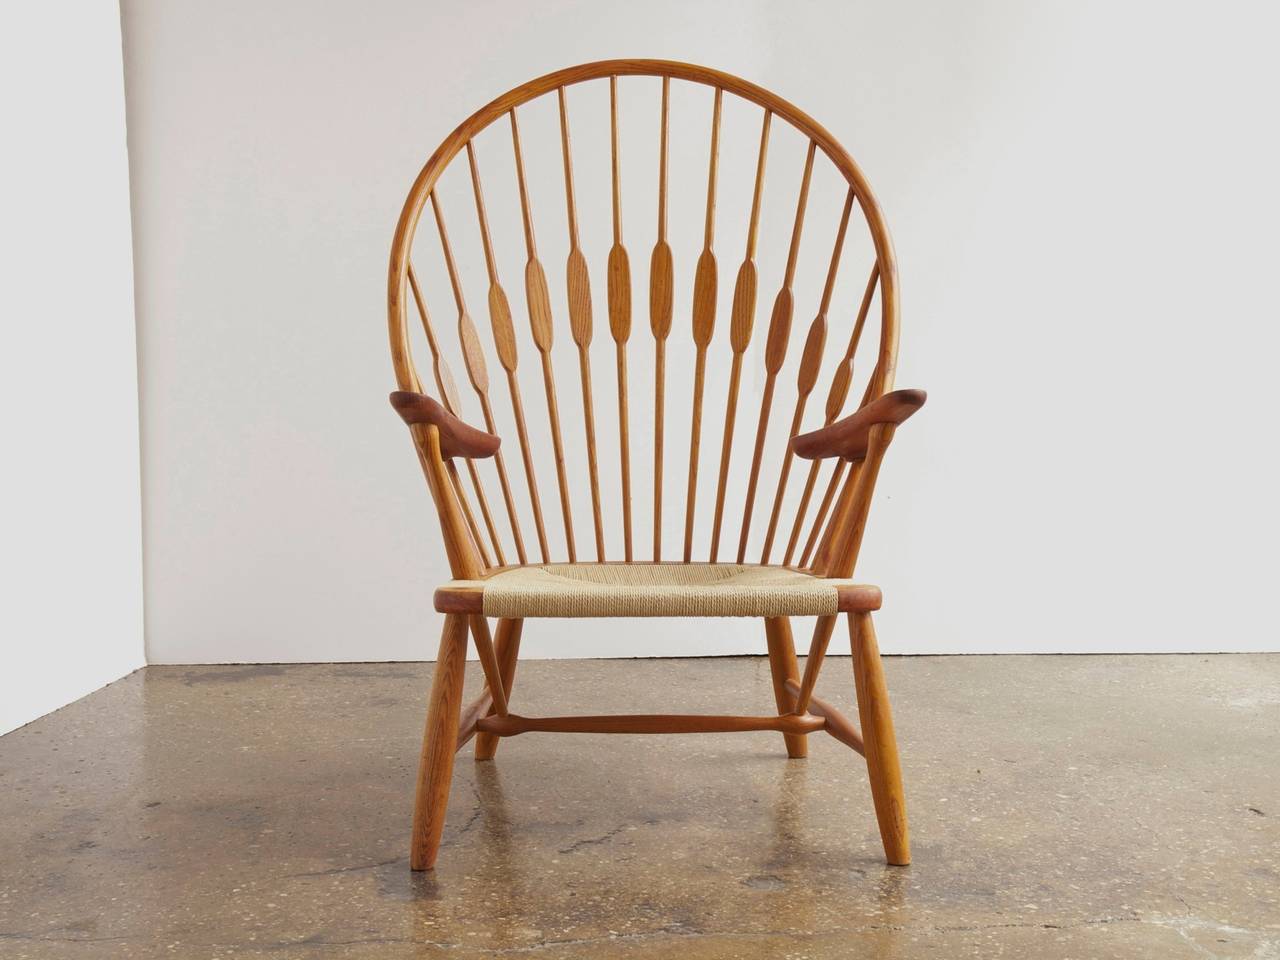 Hans J. Wegner's iconic take on the windsor chair, designed in 1947 and produced by Johannes Hansen. A wonderful example for the Danish modern collector. The chair is in excellent restored condition and has a new woven paper cord seat. Model JH 550.